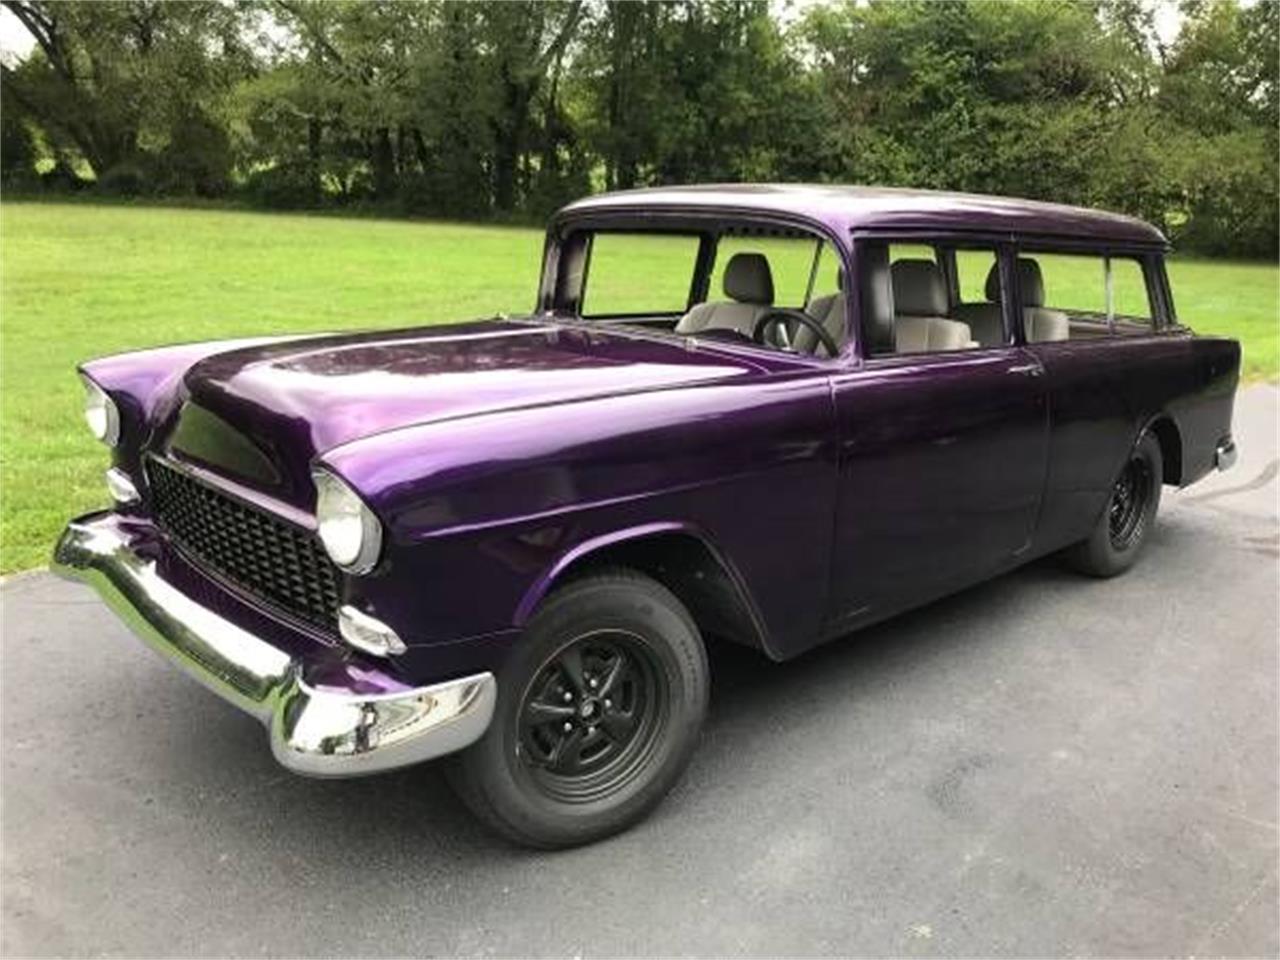 For Sale: 1955 Chevrolet Station Wagon in Cadillac, Michigan.